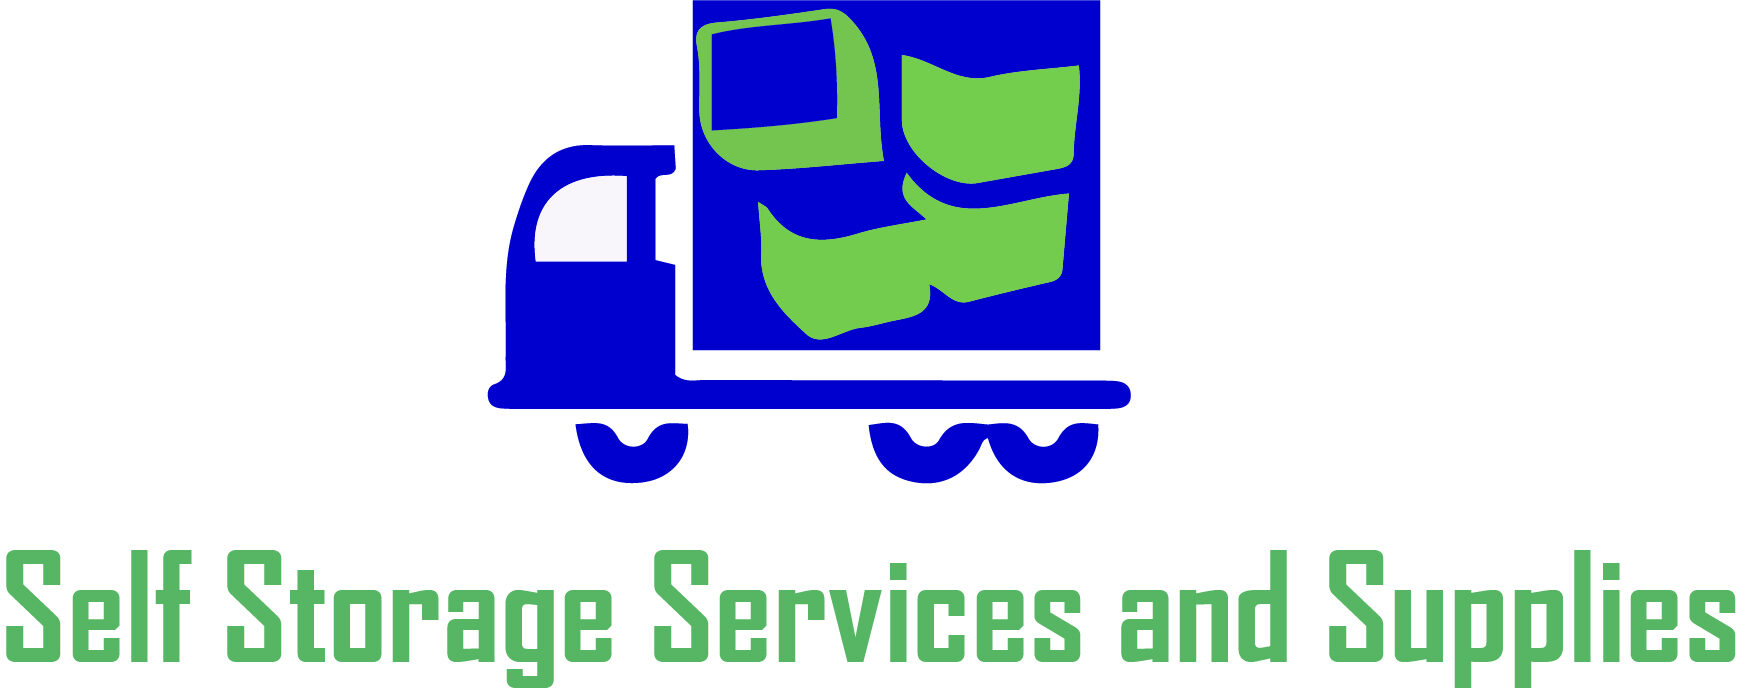 Self Storage Services and Supplies